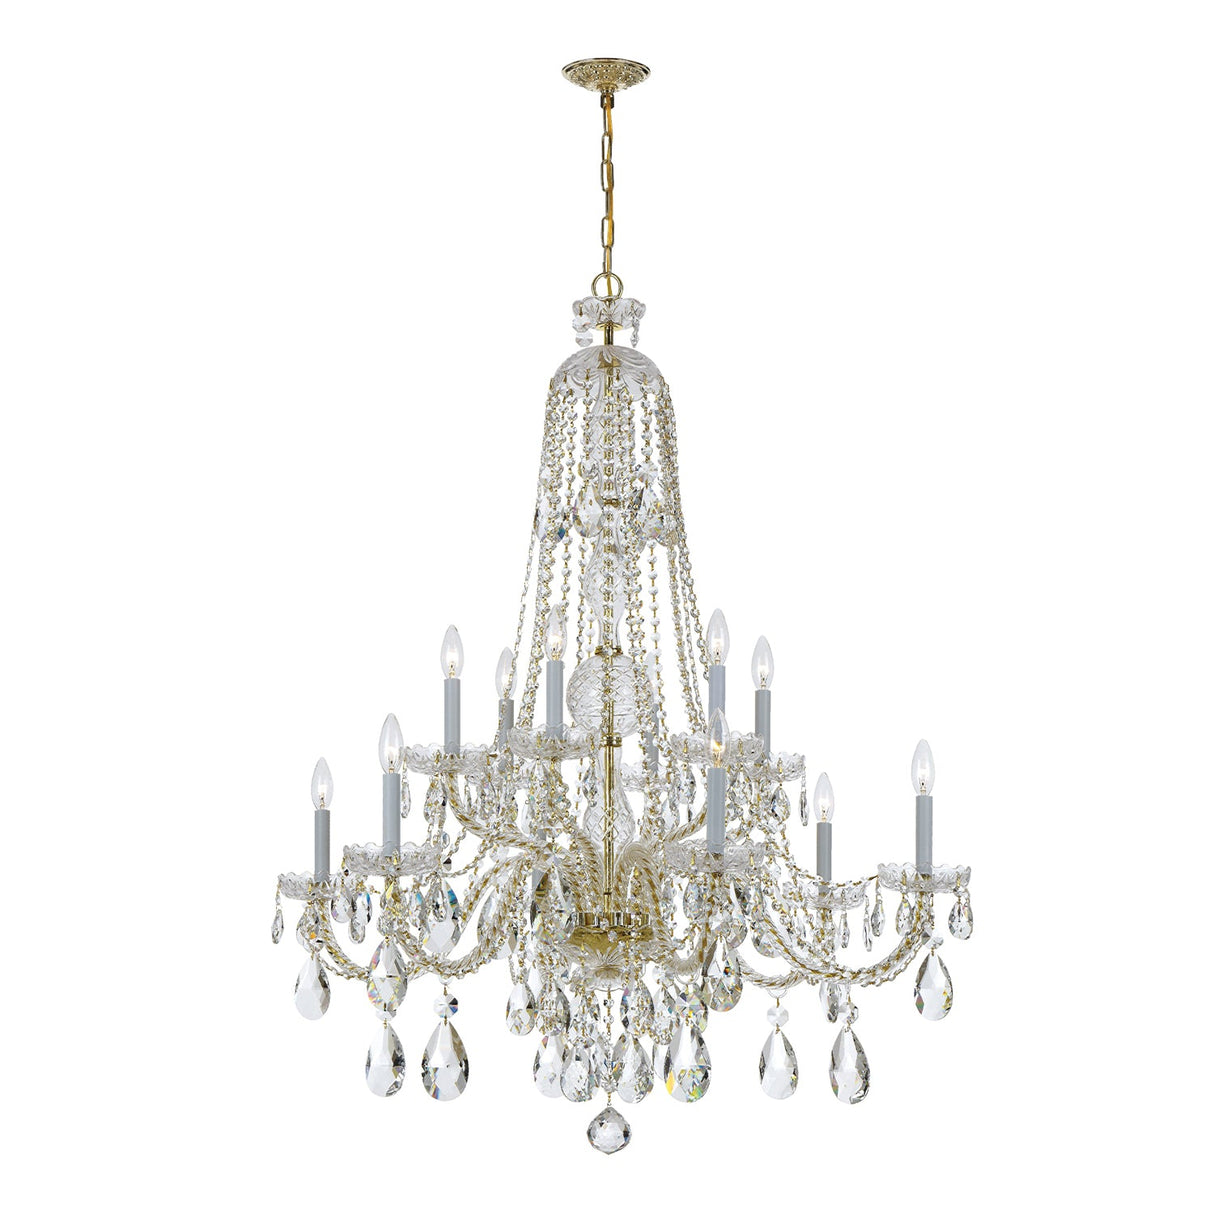 Traditional Crystal 12 Light Spectra Crystal Polished Brass Chandelier 1112-PB-CL-SAQ